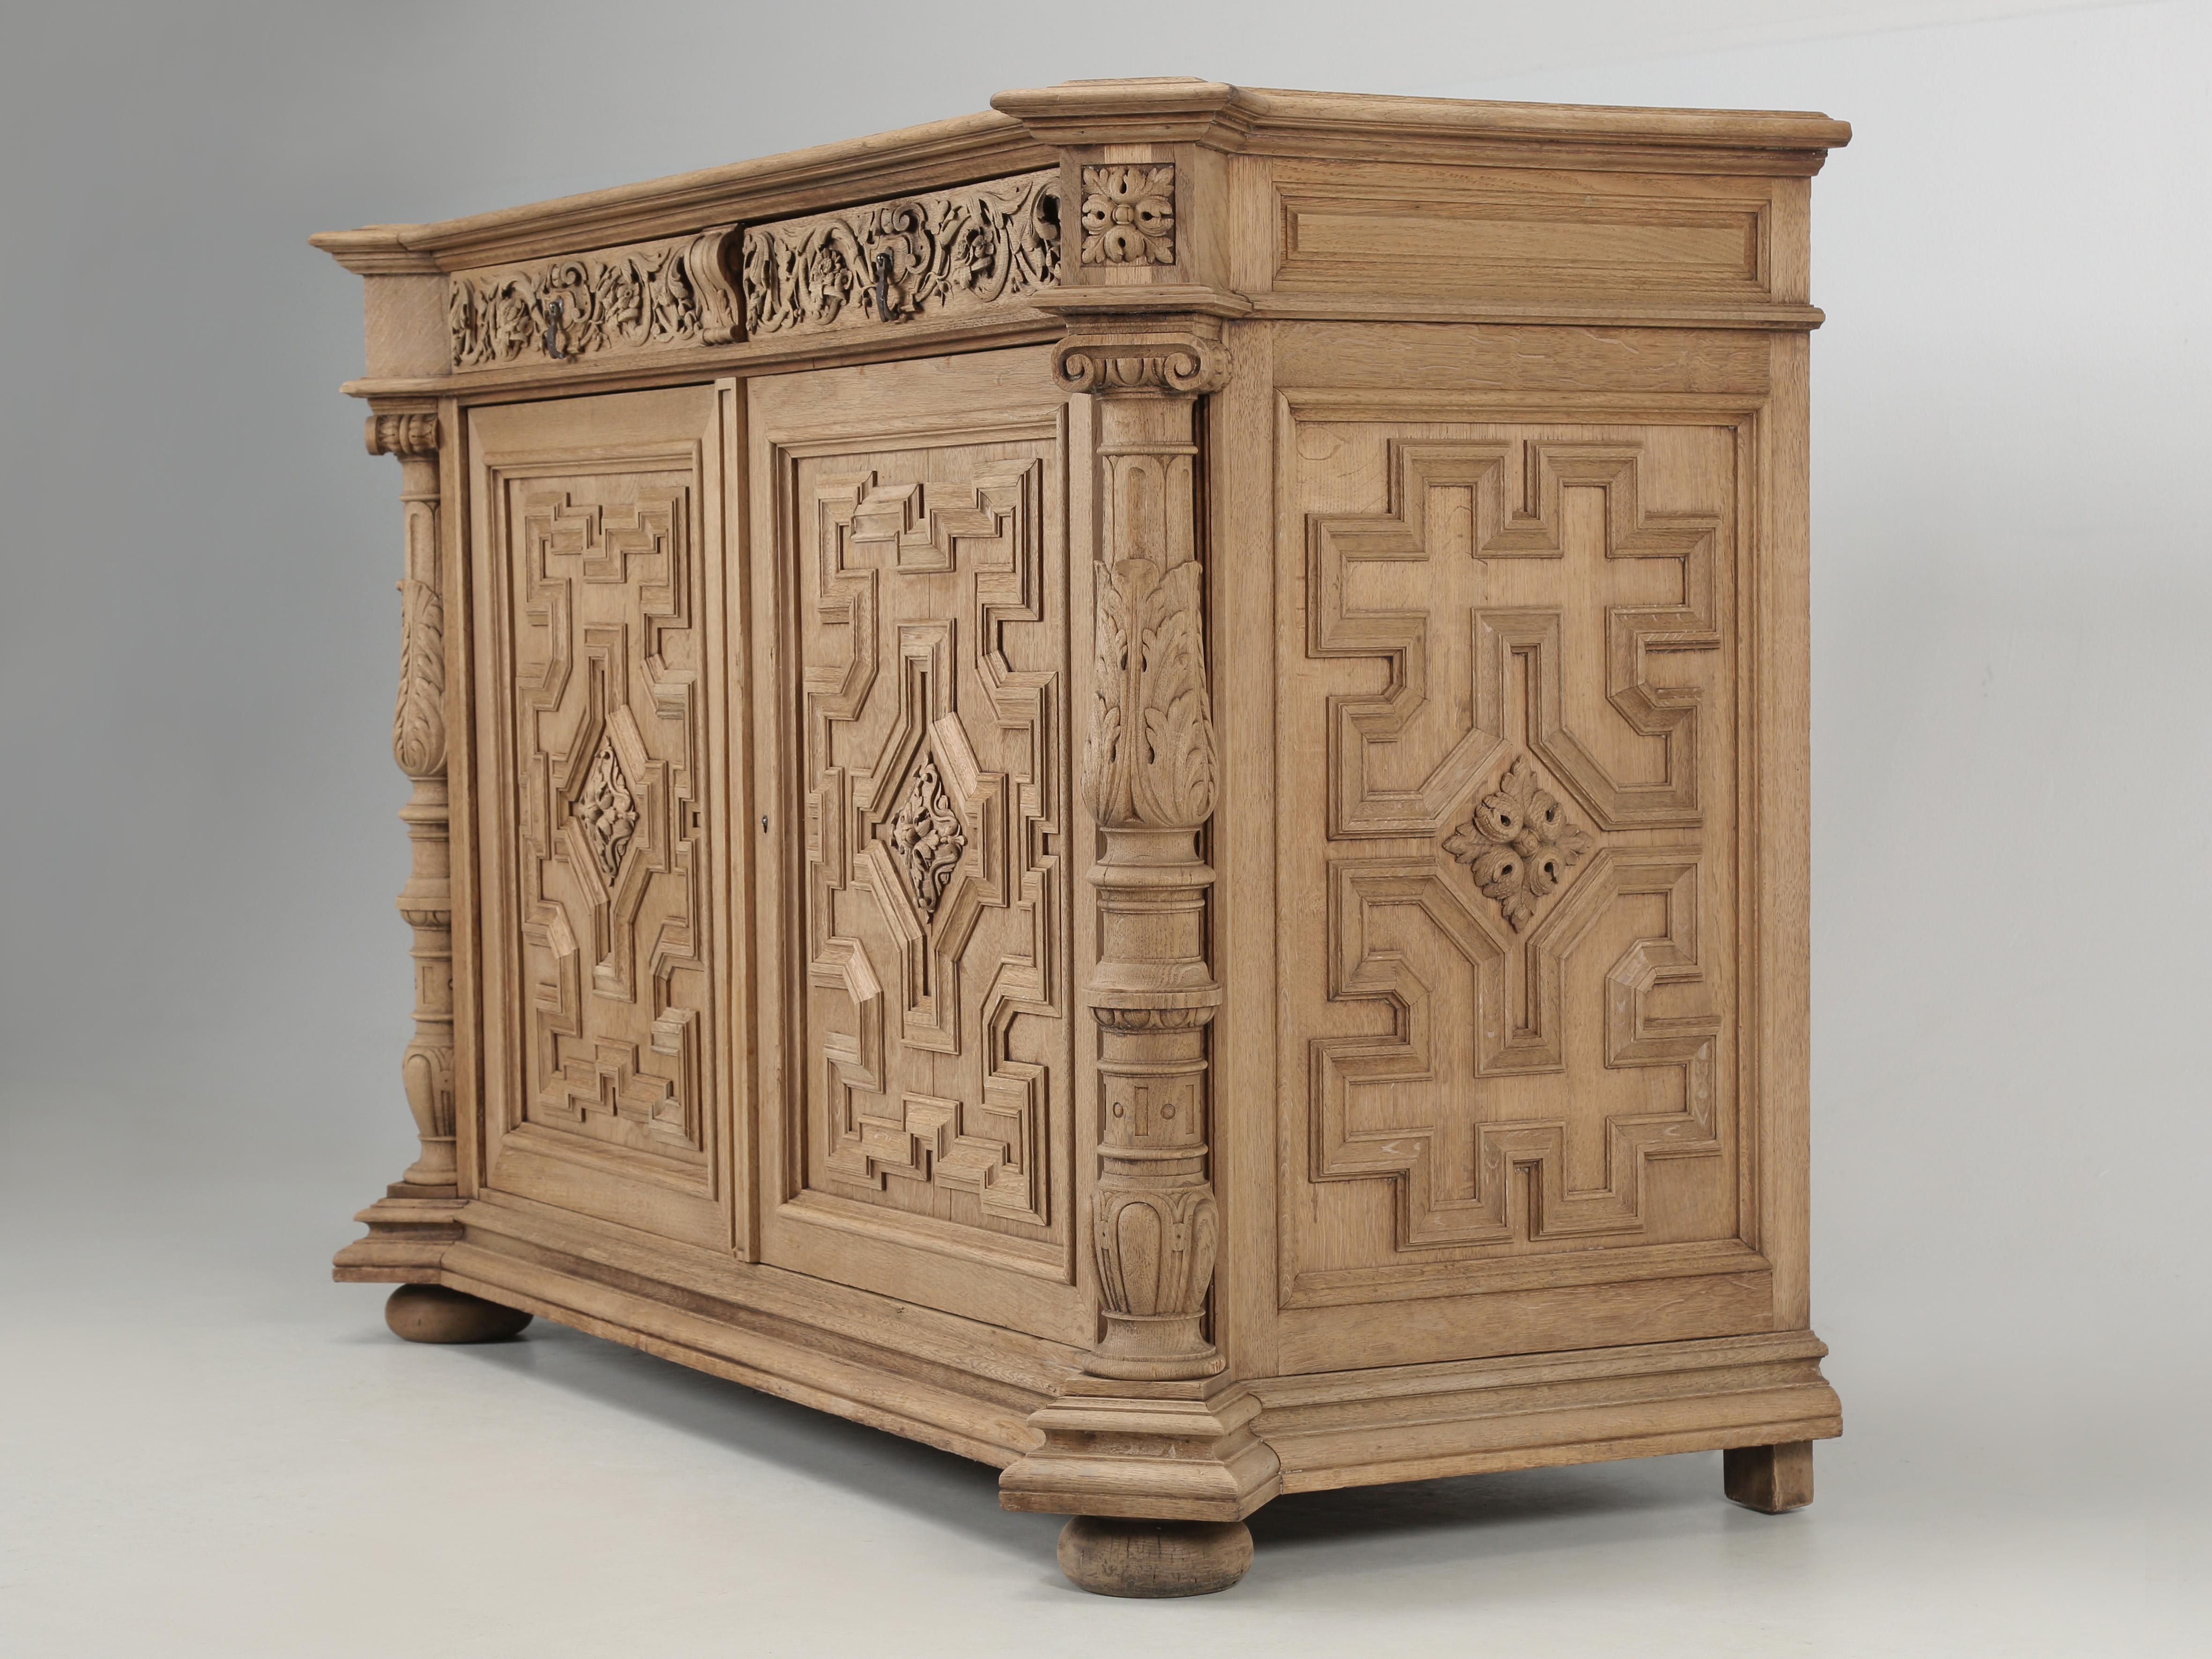 Hand-Carved Antique French Oak Buffet Geometric Design with Incredible Attention to Details